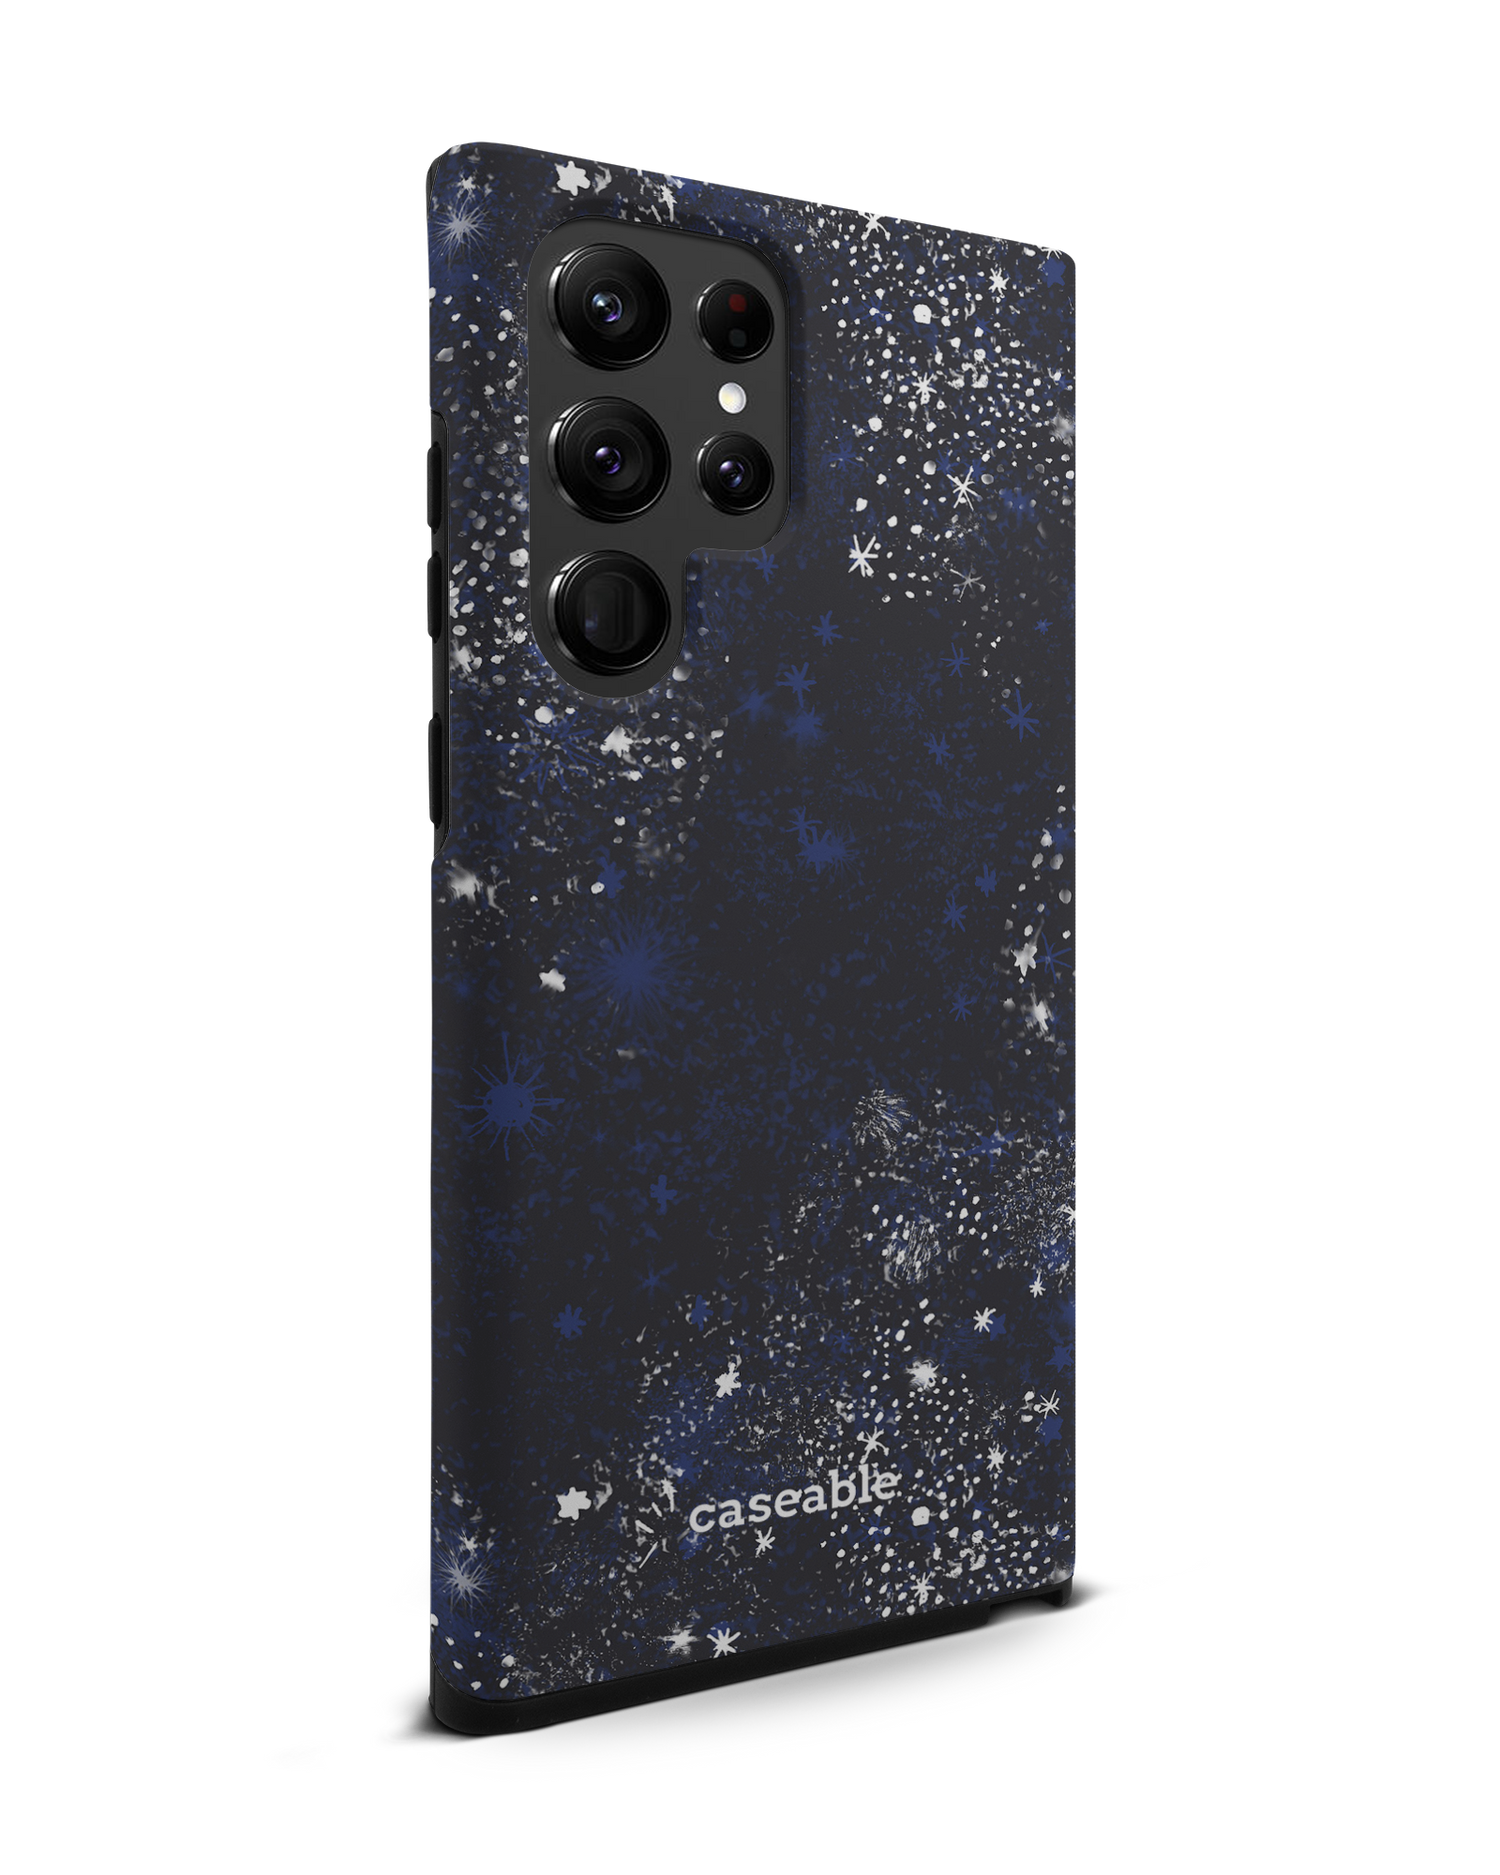 Starry Night Sky Premium Phone Case Samsung Galaxy S22 Ultra 5G: View from the left side